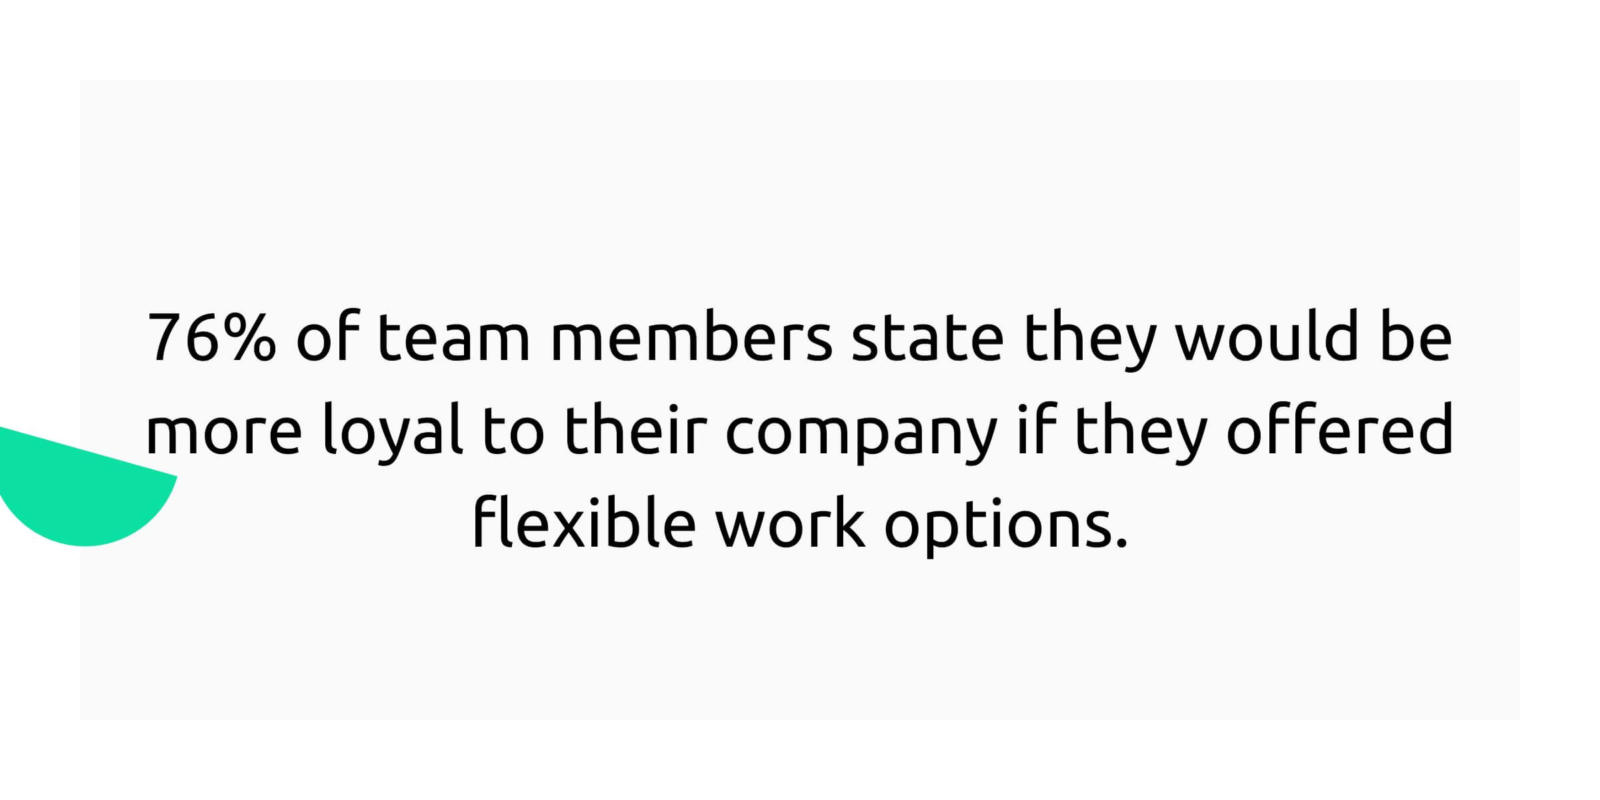 76% of team members state they would be more loyal to their company if they offered flexible work options